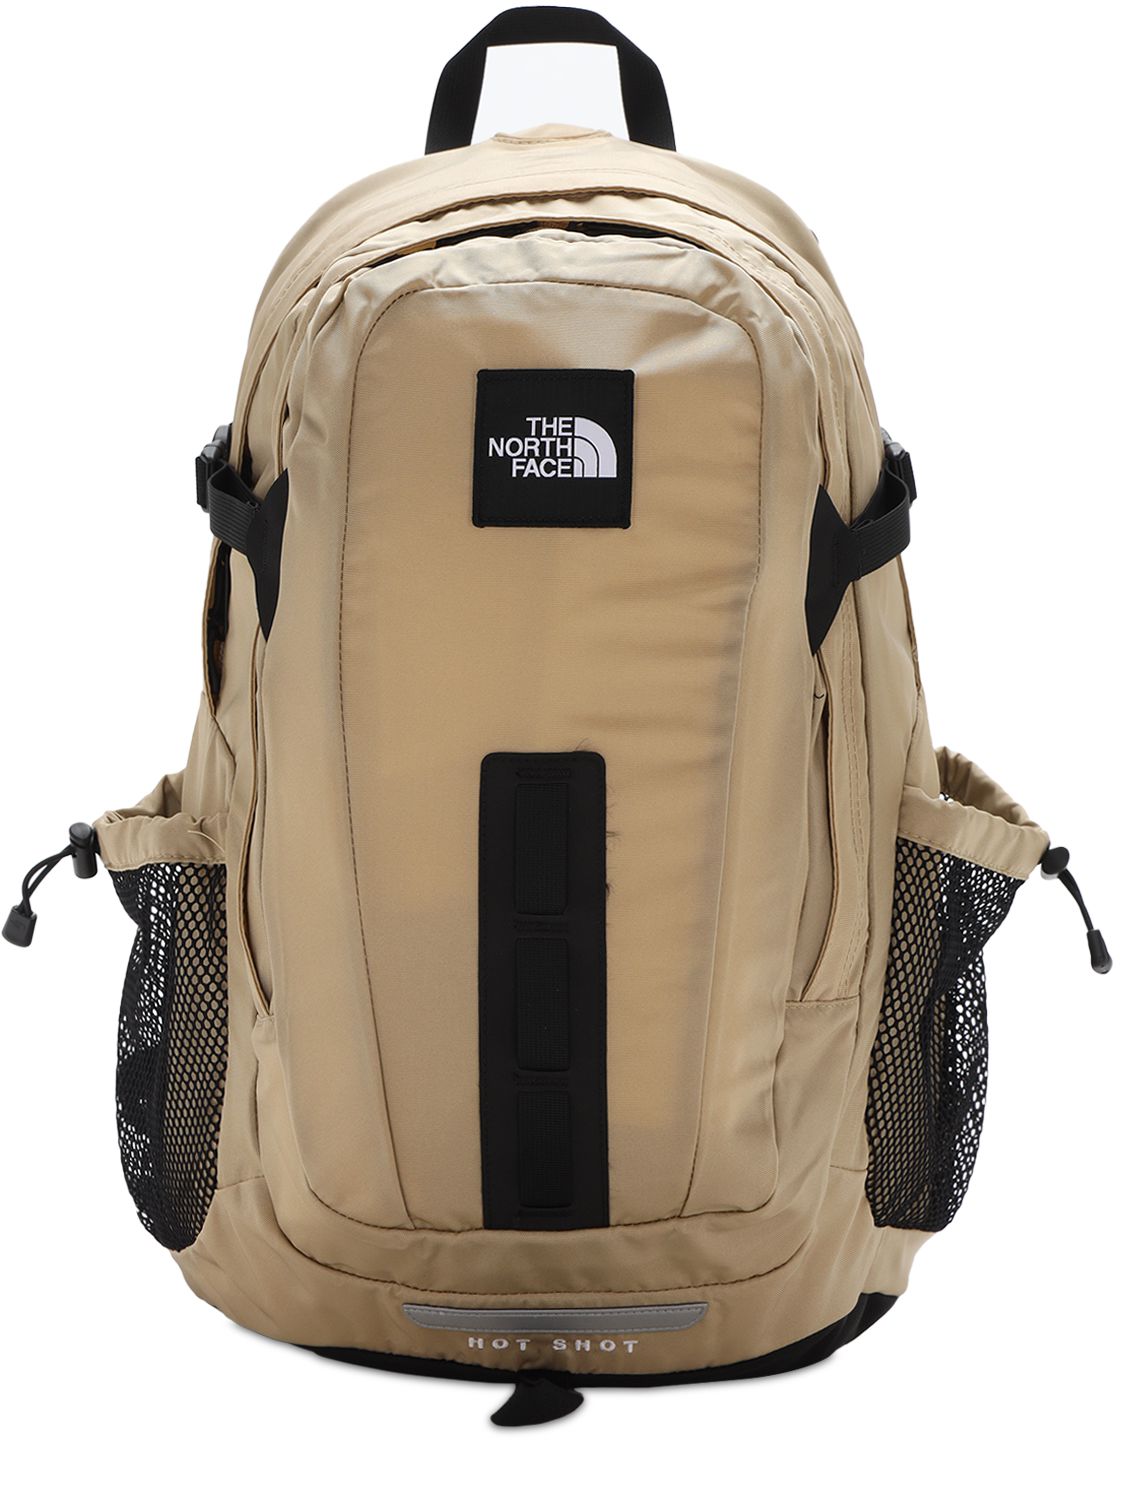 The North Face 30l Hot Shot Backpack In Beige